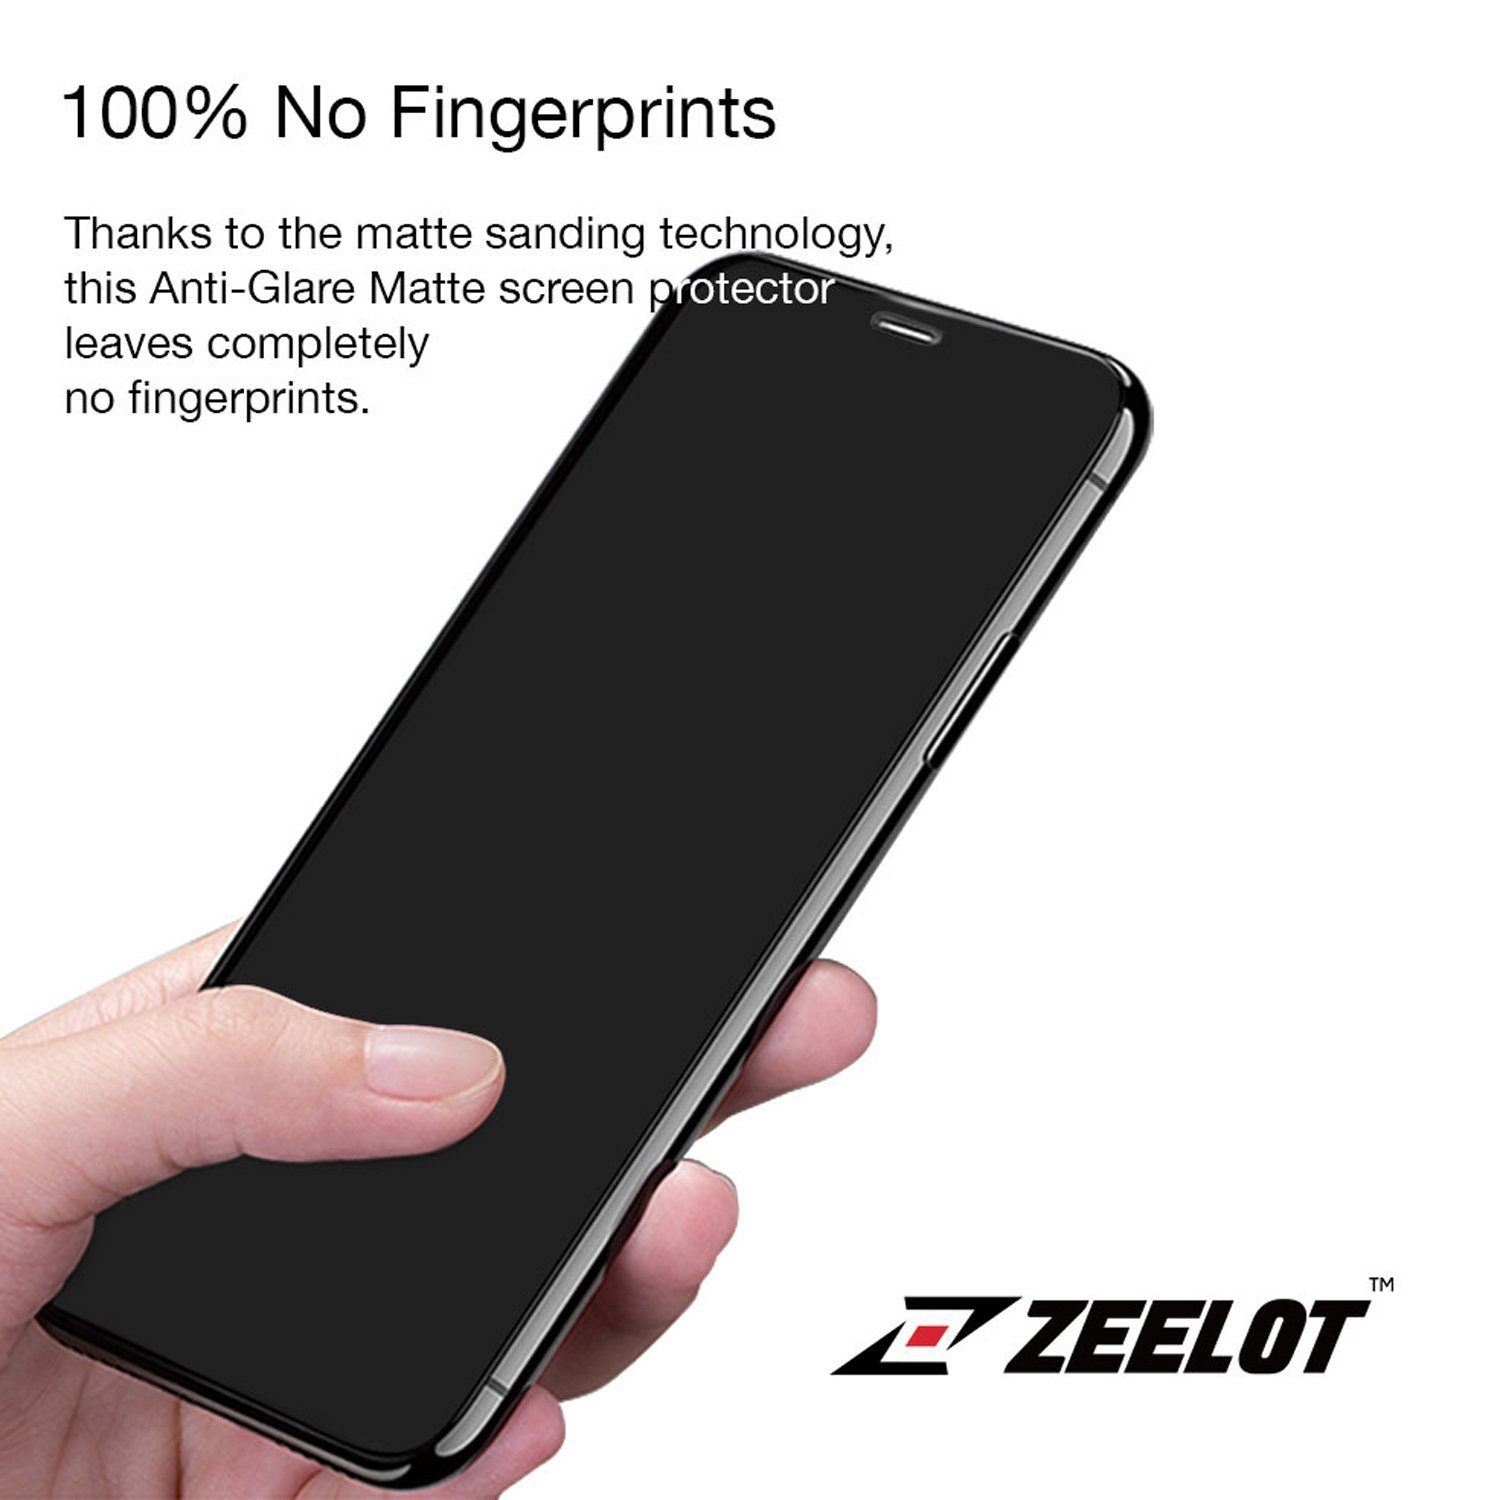 ZEELOT PureGlass 3D Full Adhesive Tempered Glass Screen Protector for Samsung Galaxy S9, Clear Tempered Glass ZEELOT 